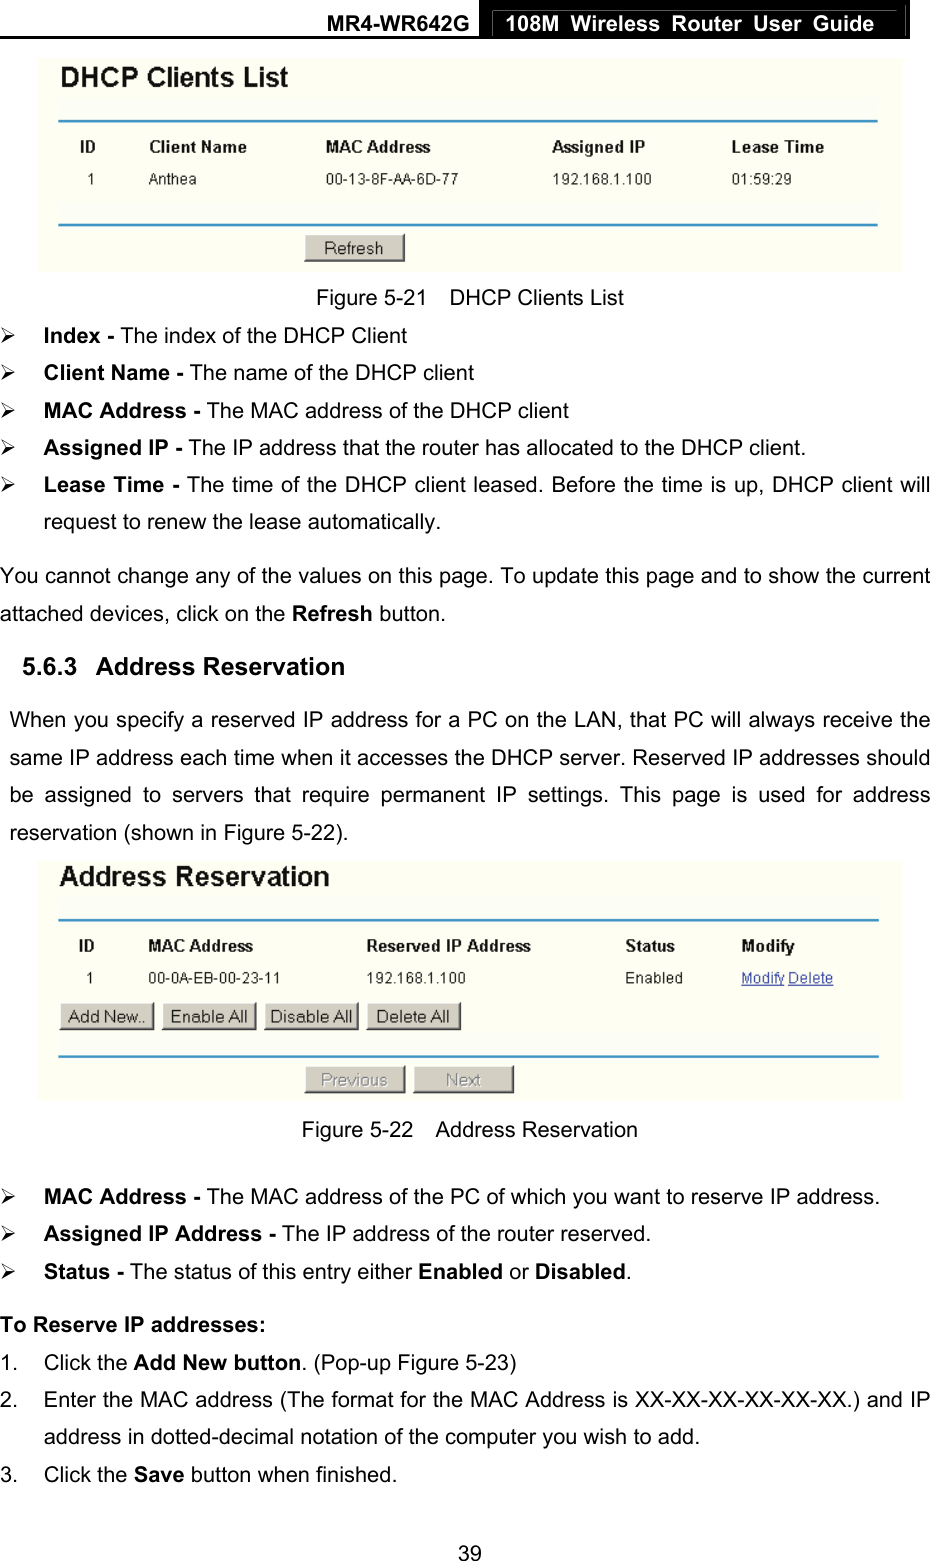 MR4-WR642G 108M Wireless Router User Guide   39 Figure 5-21    DHCP Clients List ¾ Index - The index of the DHCP Client   ¾ Client Name - The name of the DHCP client   ¾ MAC Address - The MAC address of the DHCP client   ¾ Assigned IP - The IP address that the router has allocated to the DHCP client. ¾ Lease Time - The time of the DHCP client leased. Before the time is up, DHCP client will request to renew the lease automatically. You cannot change any of the values on this page. To update this page and to show the current attached devices, click on the Refresh button. 5.6.3  Address Reservation When you specify a reserved IP address for a PC on the LAN, that PC will always receive the same IP address each time when it accesses the DHCP server. Reserved IP addresses should be assigned to servers that require permanent IP settings. This page is used for address reservation (shown in Figure 5-22).  Figure 5-22  Address Reservation ¾ MAC Address - The MAC address of the PC of which you want to reserve IP address. ¾ Assigned IP Address - The IP address of the router reserved. ¾ Status - The status of this entry either Enabled or Disabled. To Reserve IP addresses:  1. Click the Add New button. (Pop-up Figure 5-23) 2.  Enter the MAC address (The format for the MAC Address is XX-XX-XX-XX-XX-XX.) and IP address in dotted-decimal notation of the computer you wish to add.   3. Click the Save button when finished.   